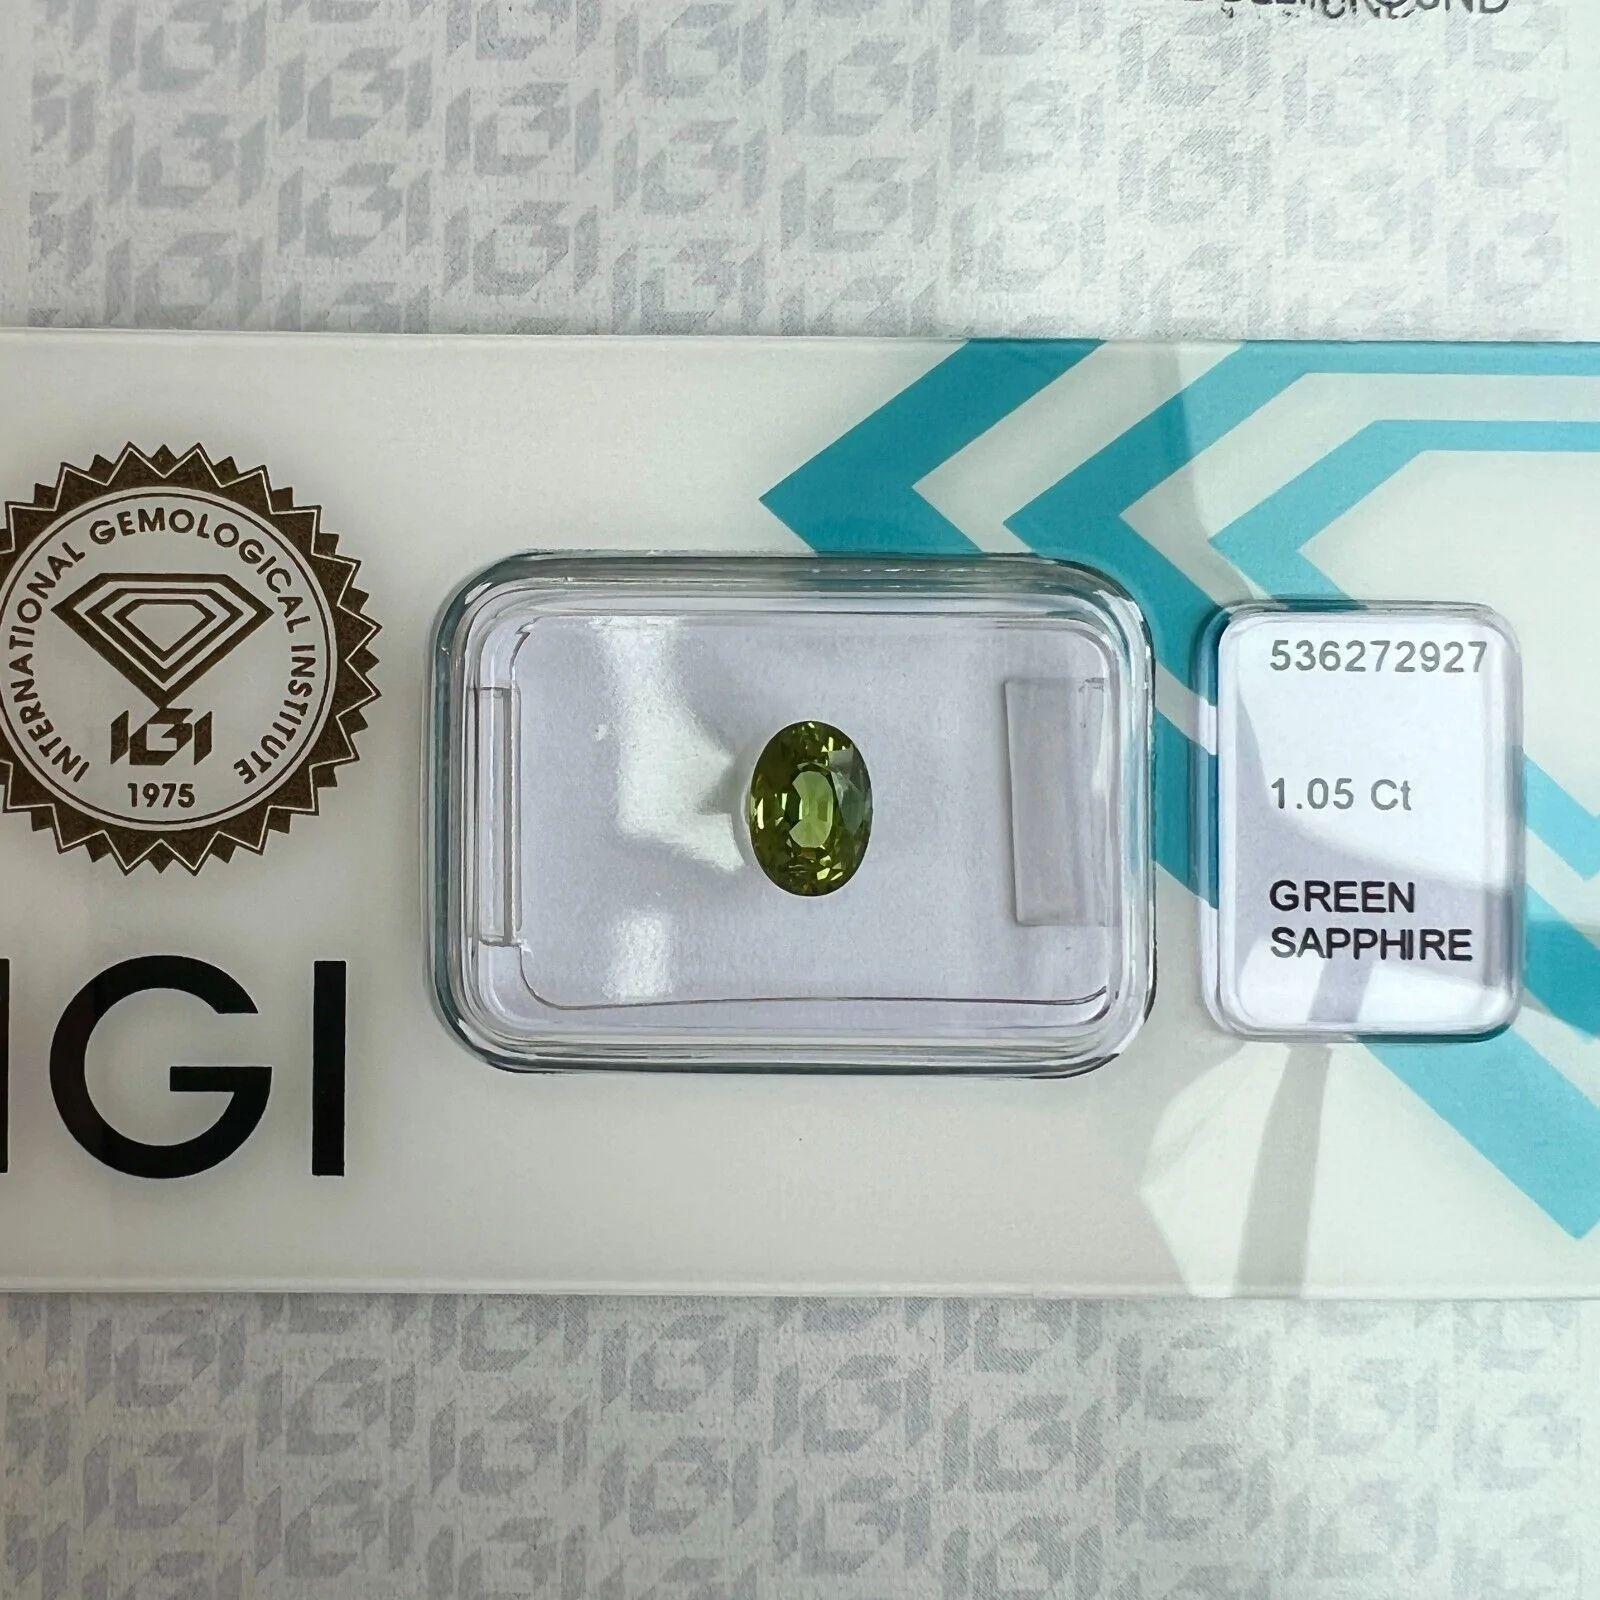 1.05ct Vivid Green Oval Cut Sapphire Untreated Rare IGI Certified Blister For Sale 1